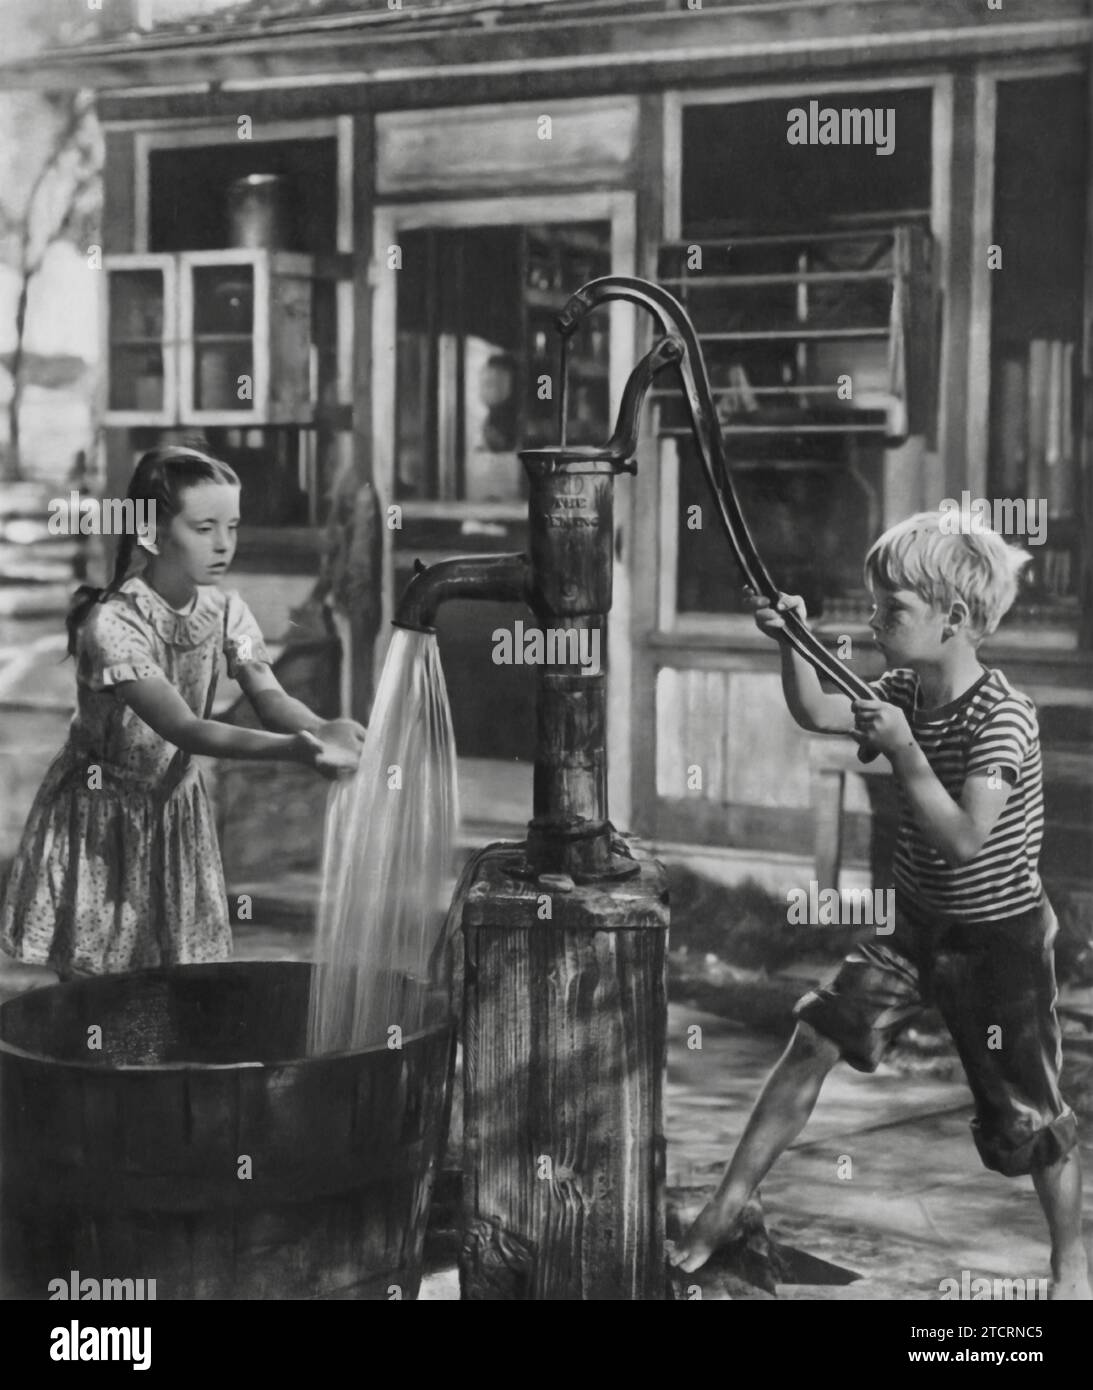 Margaret O'Brien and Jackie Jenkins are captured in a poignant scene by a water well in the film 'Our Vines Have Tender Grapes' (1945). Set in the heartland of America, the movie offers a touching portrayal of rural life and the simple joys and challenges faced by its residents. O'Brien plays Selma Jacobson, while Jenkins takes on the role of her friend, Arnold Hanson. Stock Photo